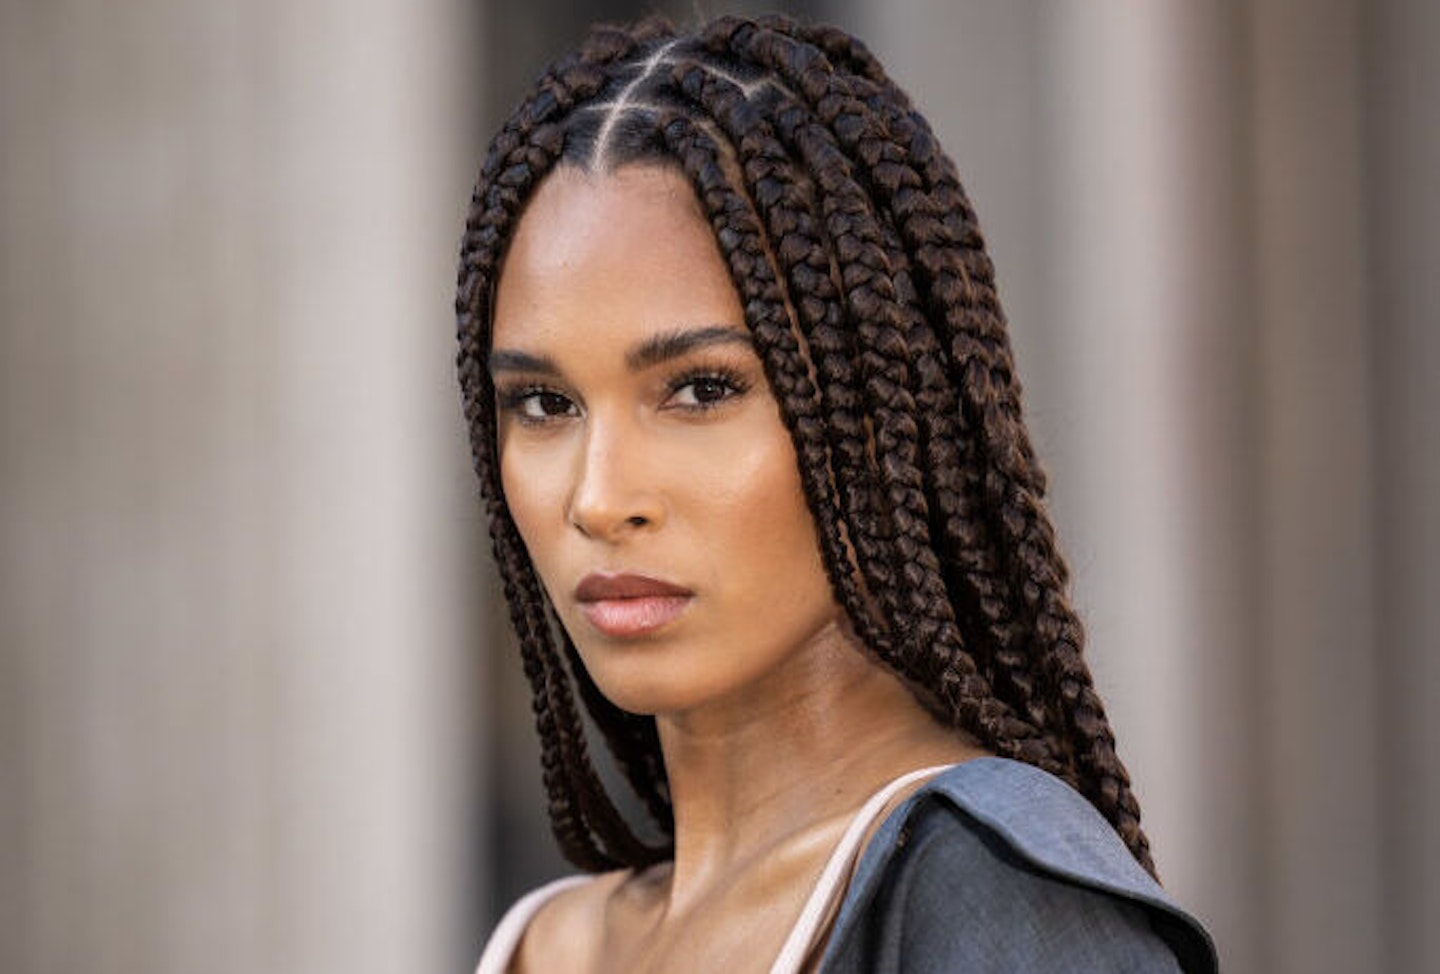 10 Braided Hairstyles For Black Women That Are Trending Now